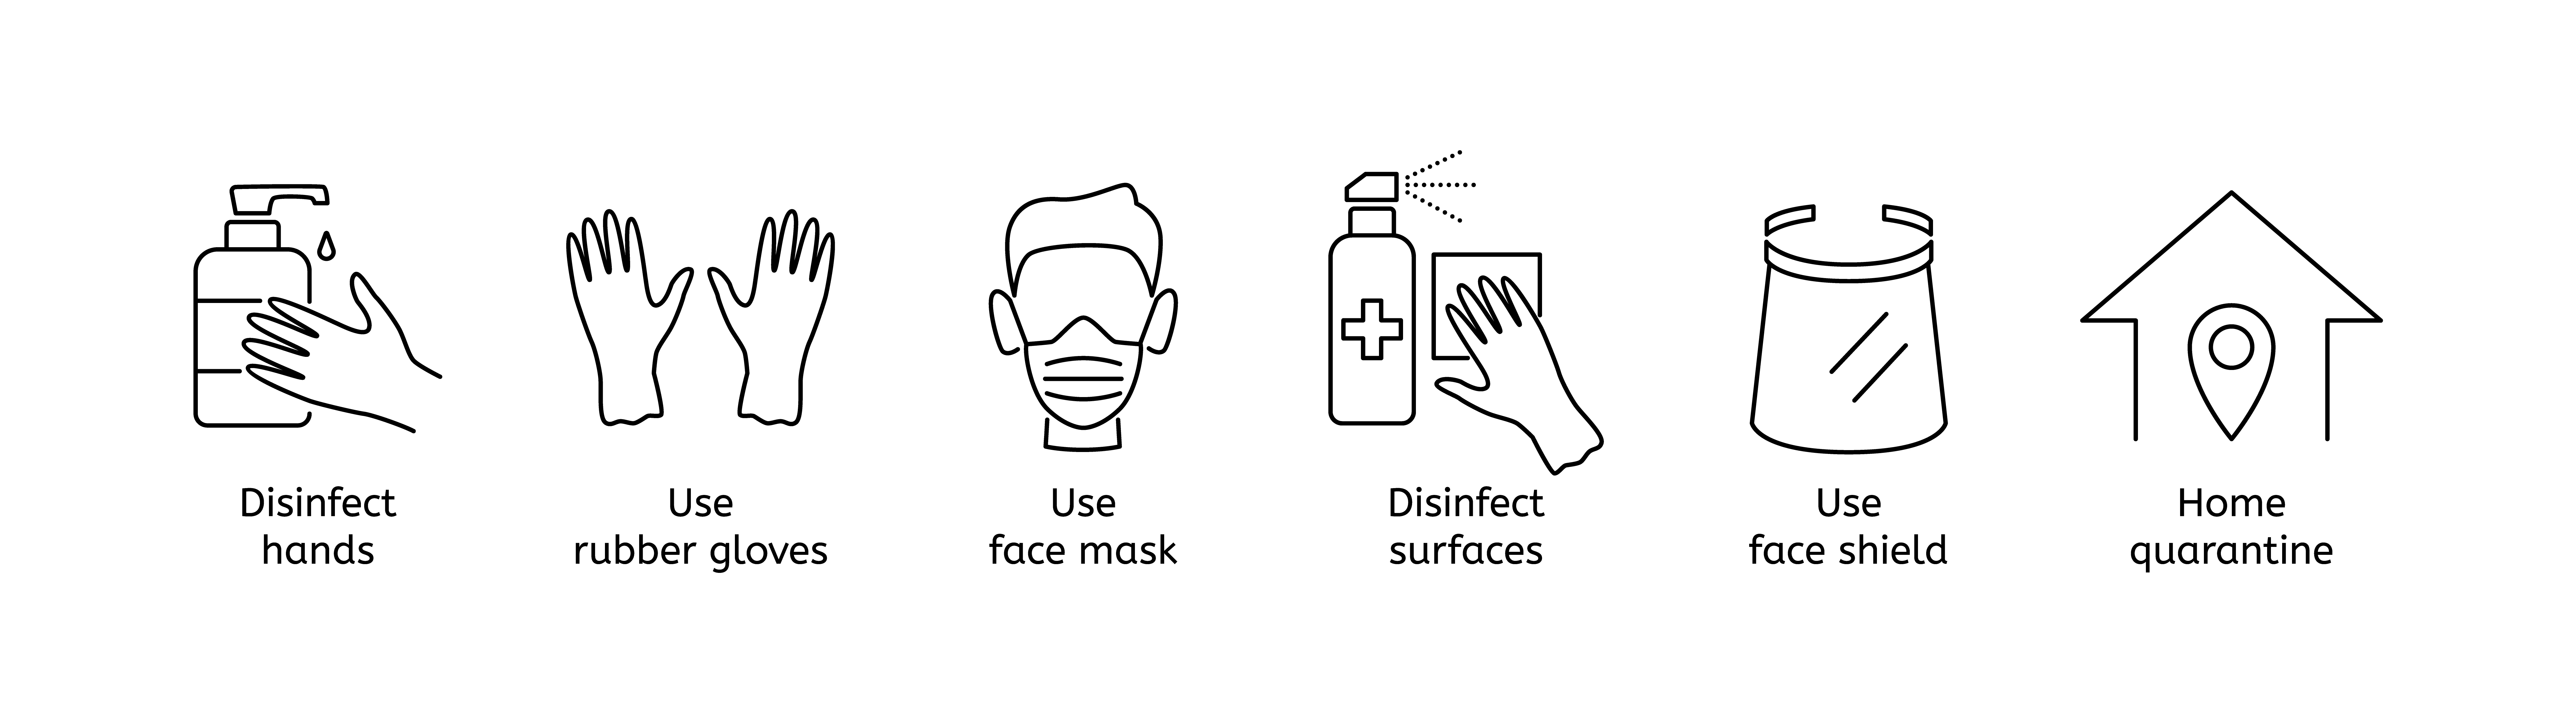 Coronavirus prevention line icons. Covid-19 protection outline symbol set, disinfect hand and surfaces, use gloves and medical mask, face shield, stay home at quarantine vector isolated illustration. Coronavirus prevention line icons. Covid-19 protection outline symbol set, disinfect hand and surfaces, use gloves and medical mask, face shield, stay home vector illustration